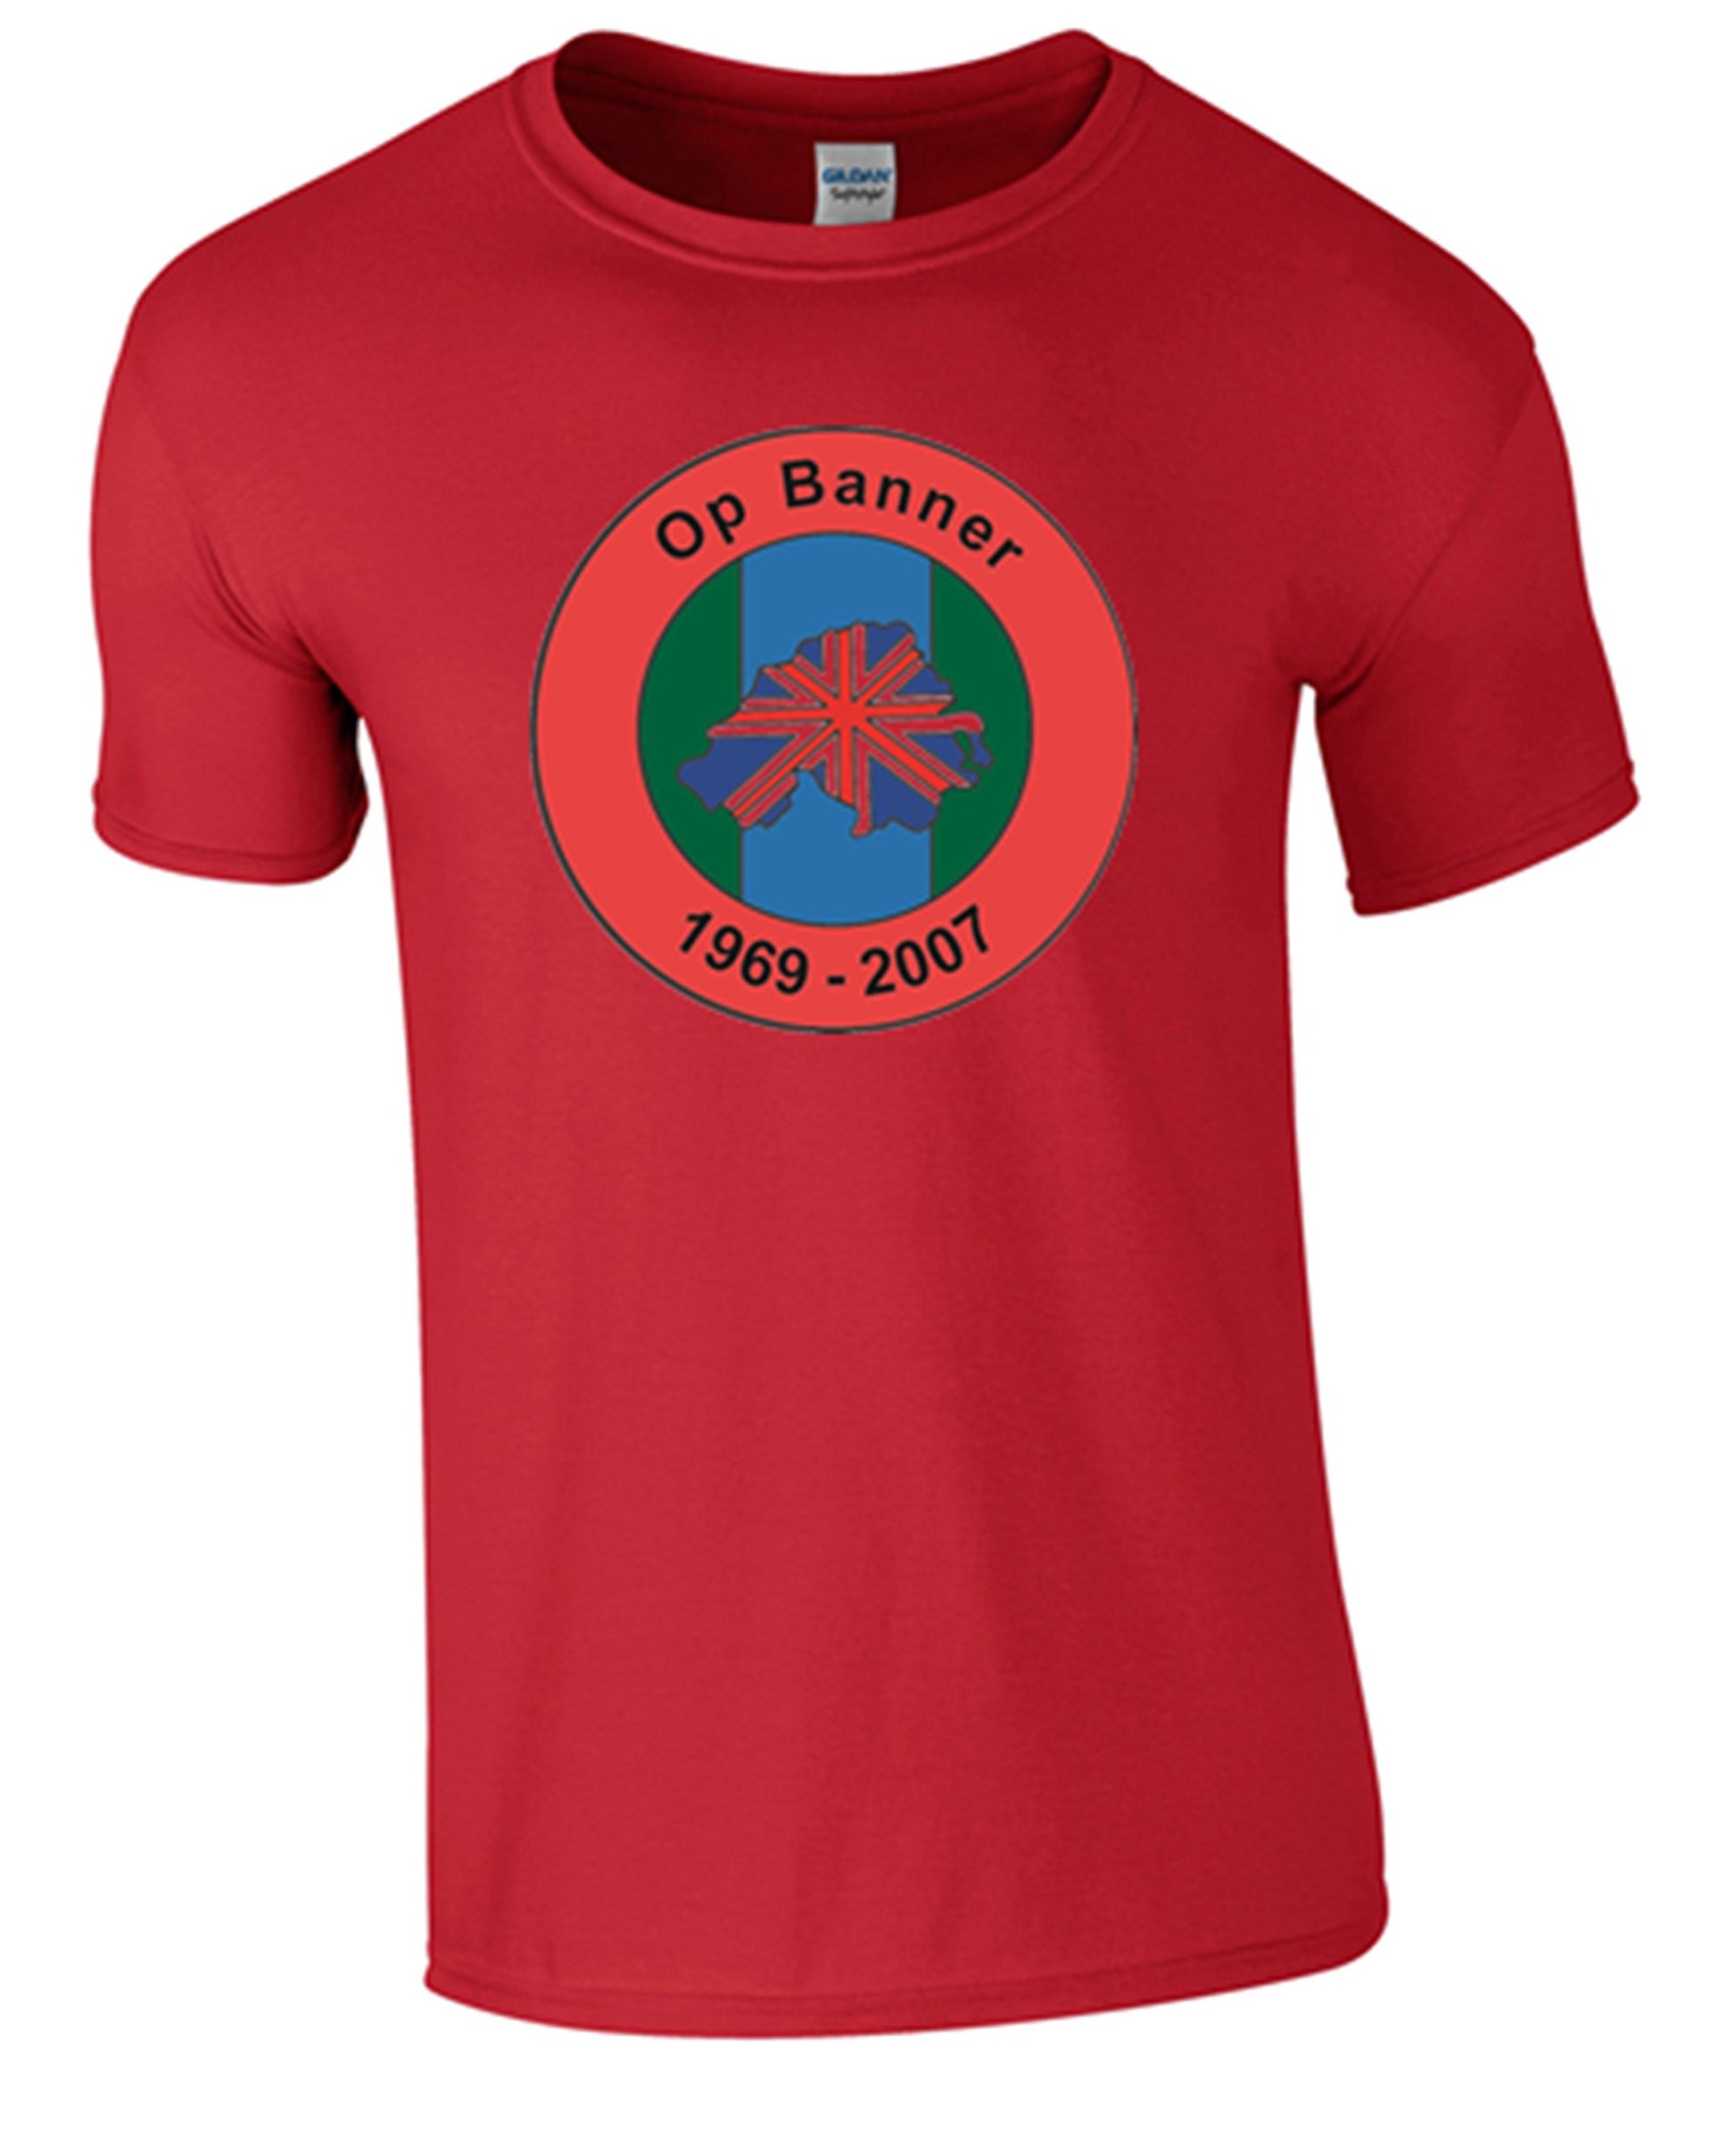 Northern Ireland Ops Banner T-Shirt (L, Red) - Army 1157 kit Army 1157 Kit